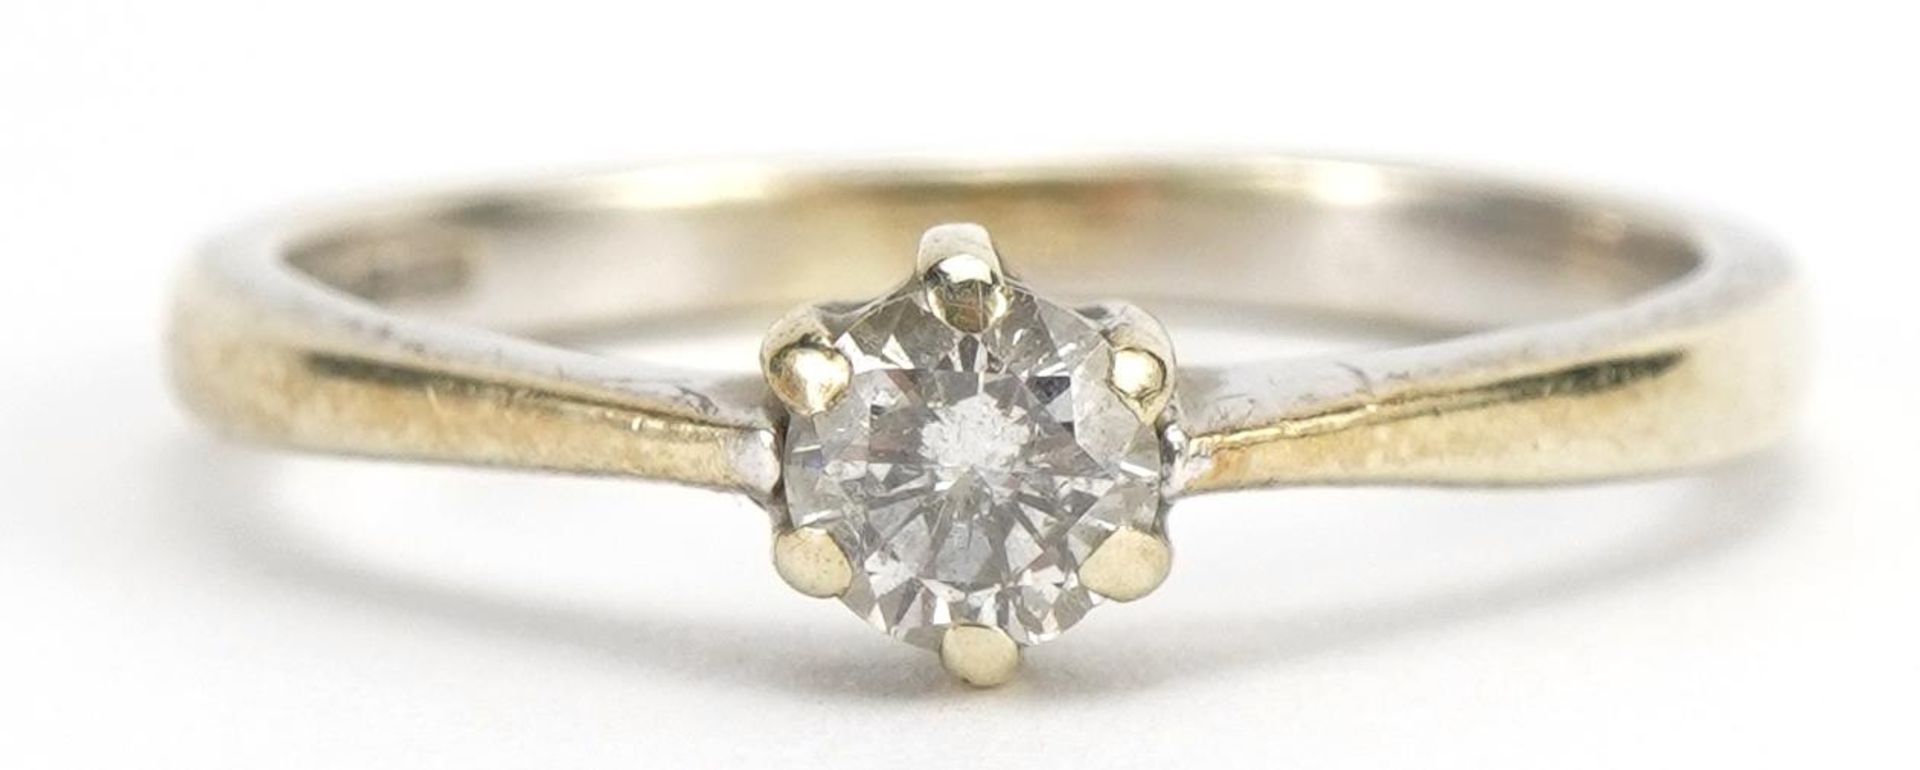 9ct white gold diamond solitaire ring, the diamond approximately 4.2mm in diameter, size N, 2.3g